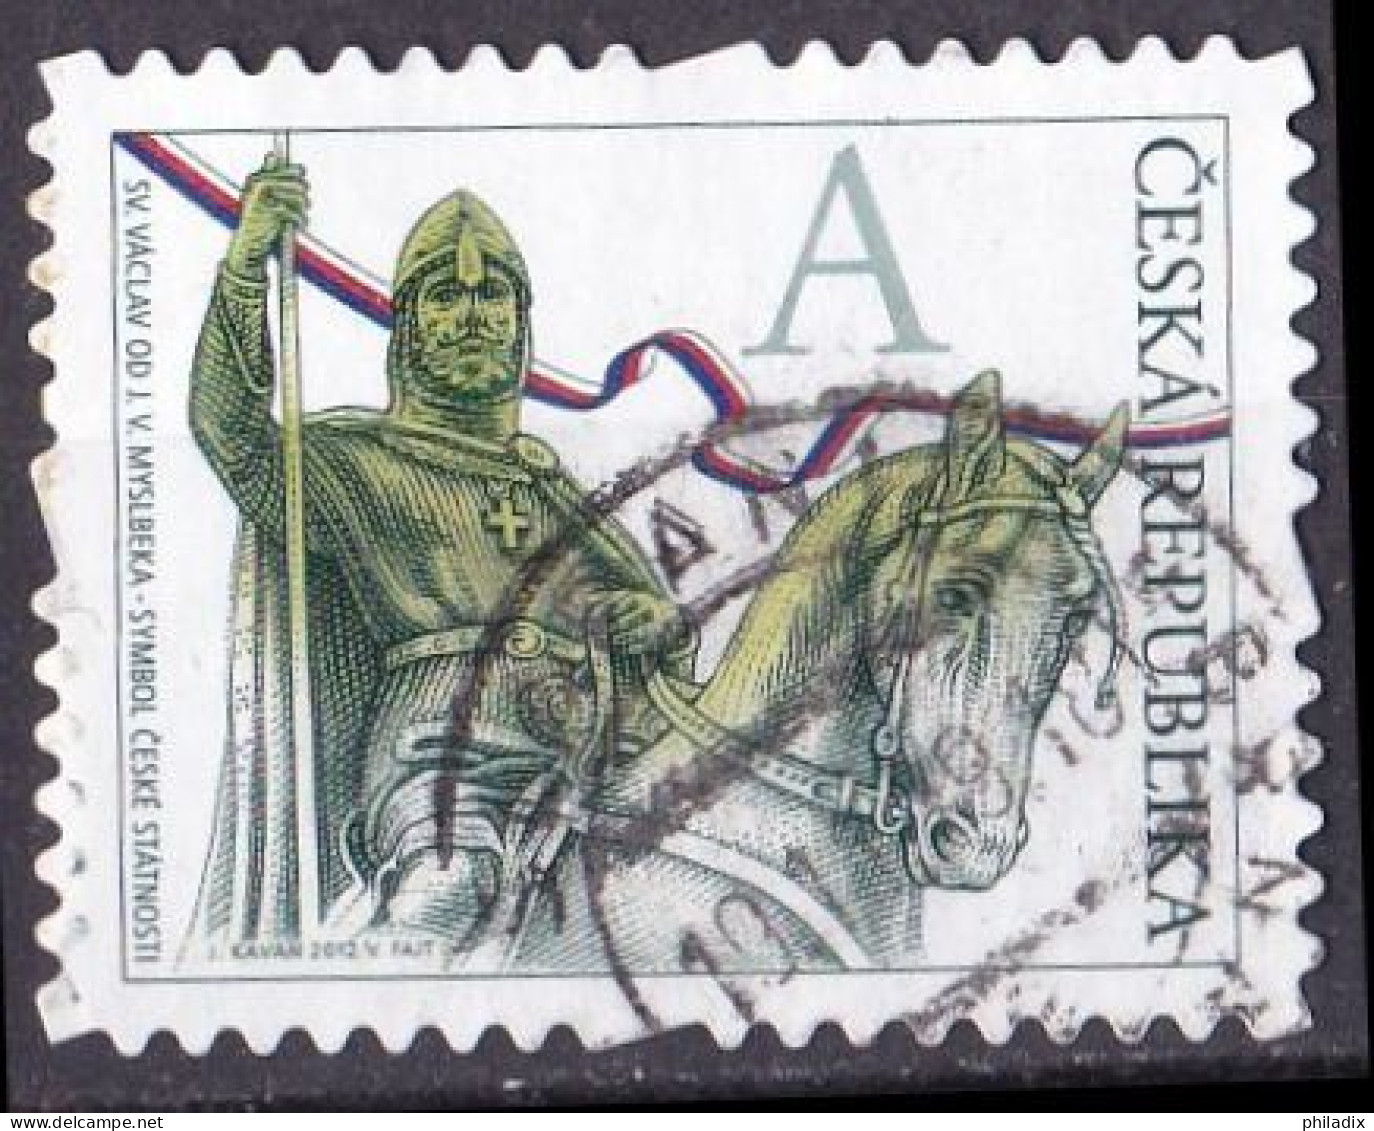 # Tschechische Republik Marke Von 2012 O/used (A3-32) - Used Stamps